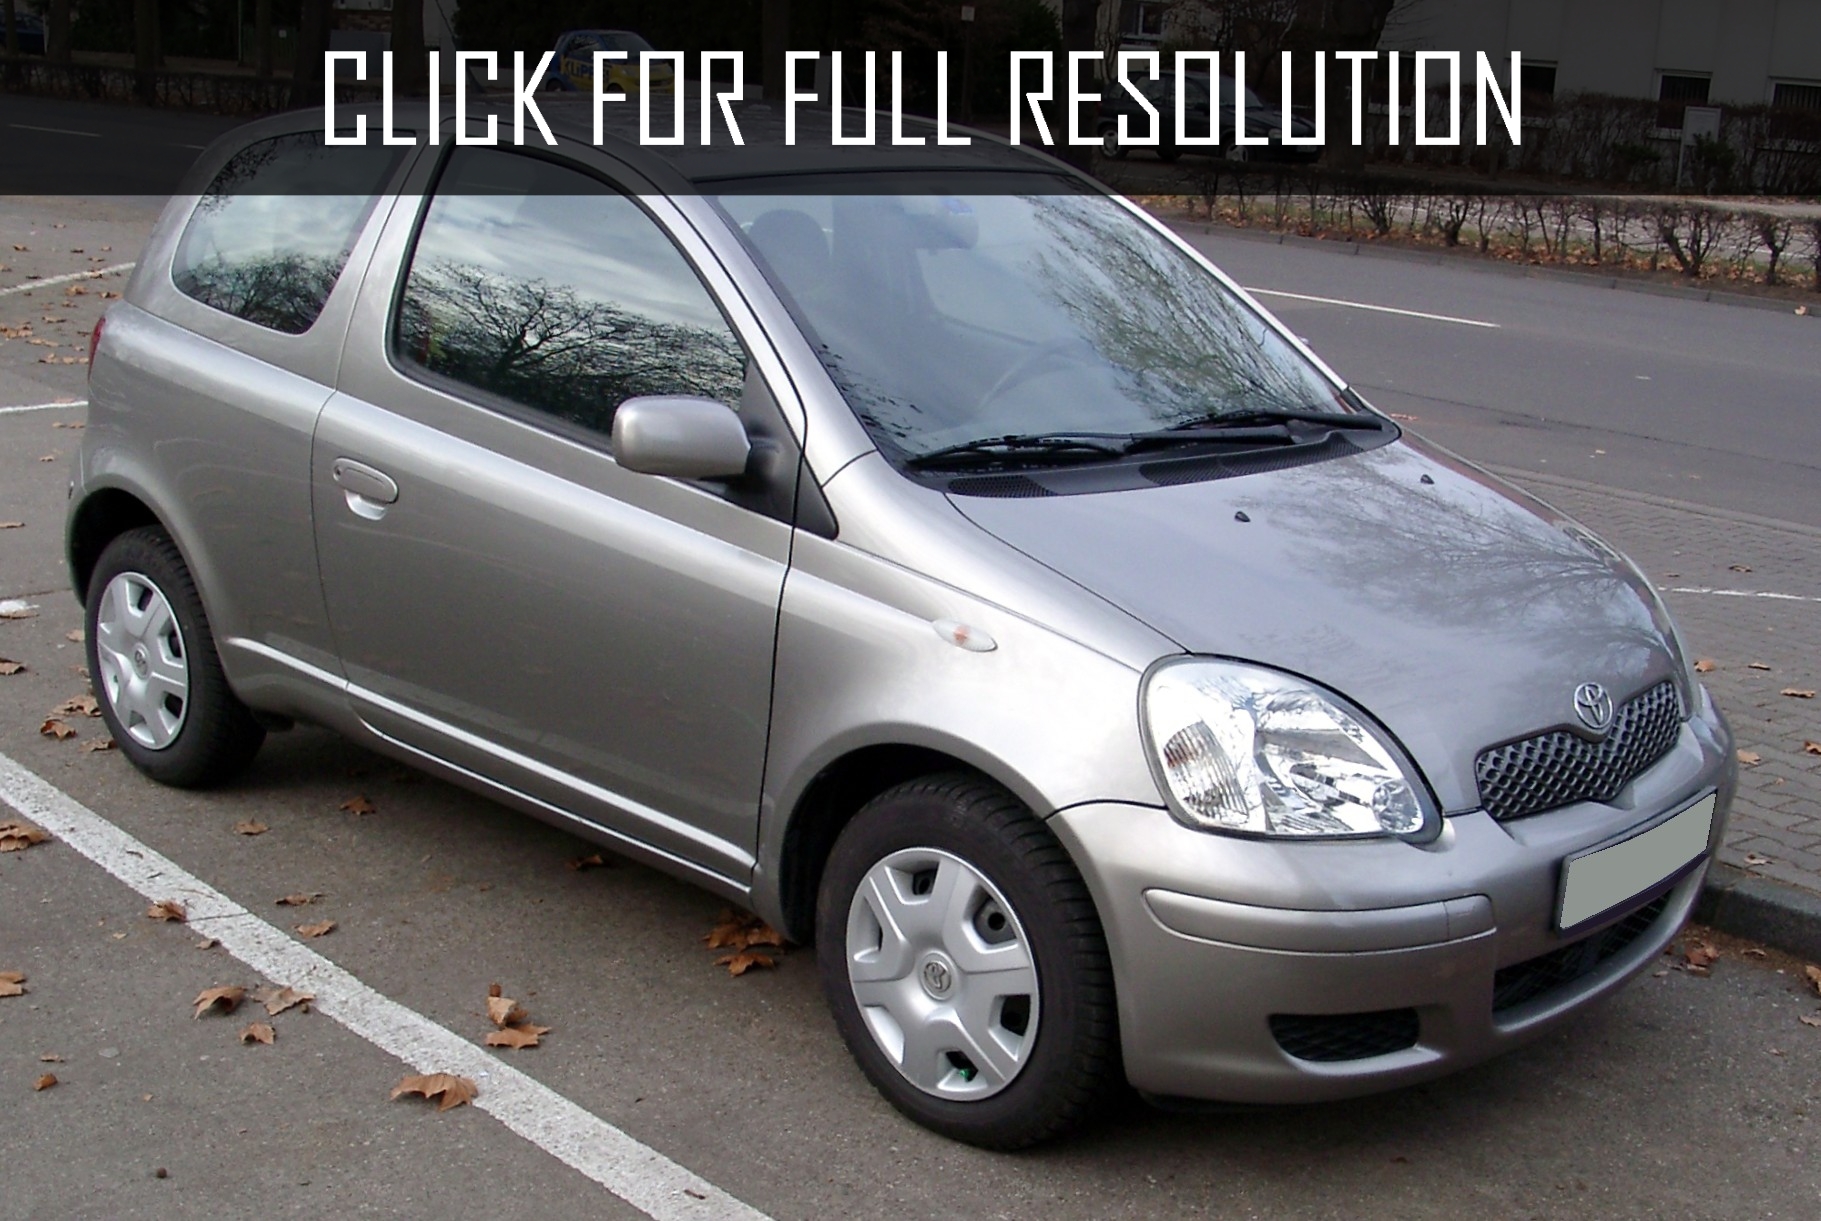 Toyota Yaris best image #7/27 - share and download